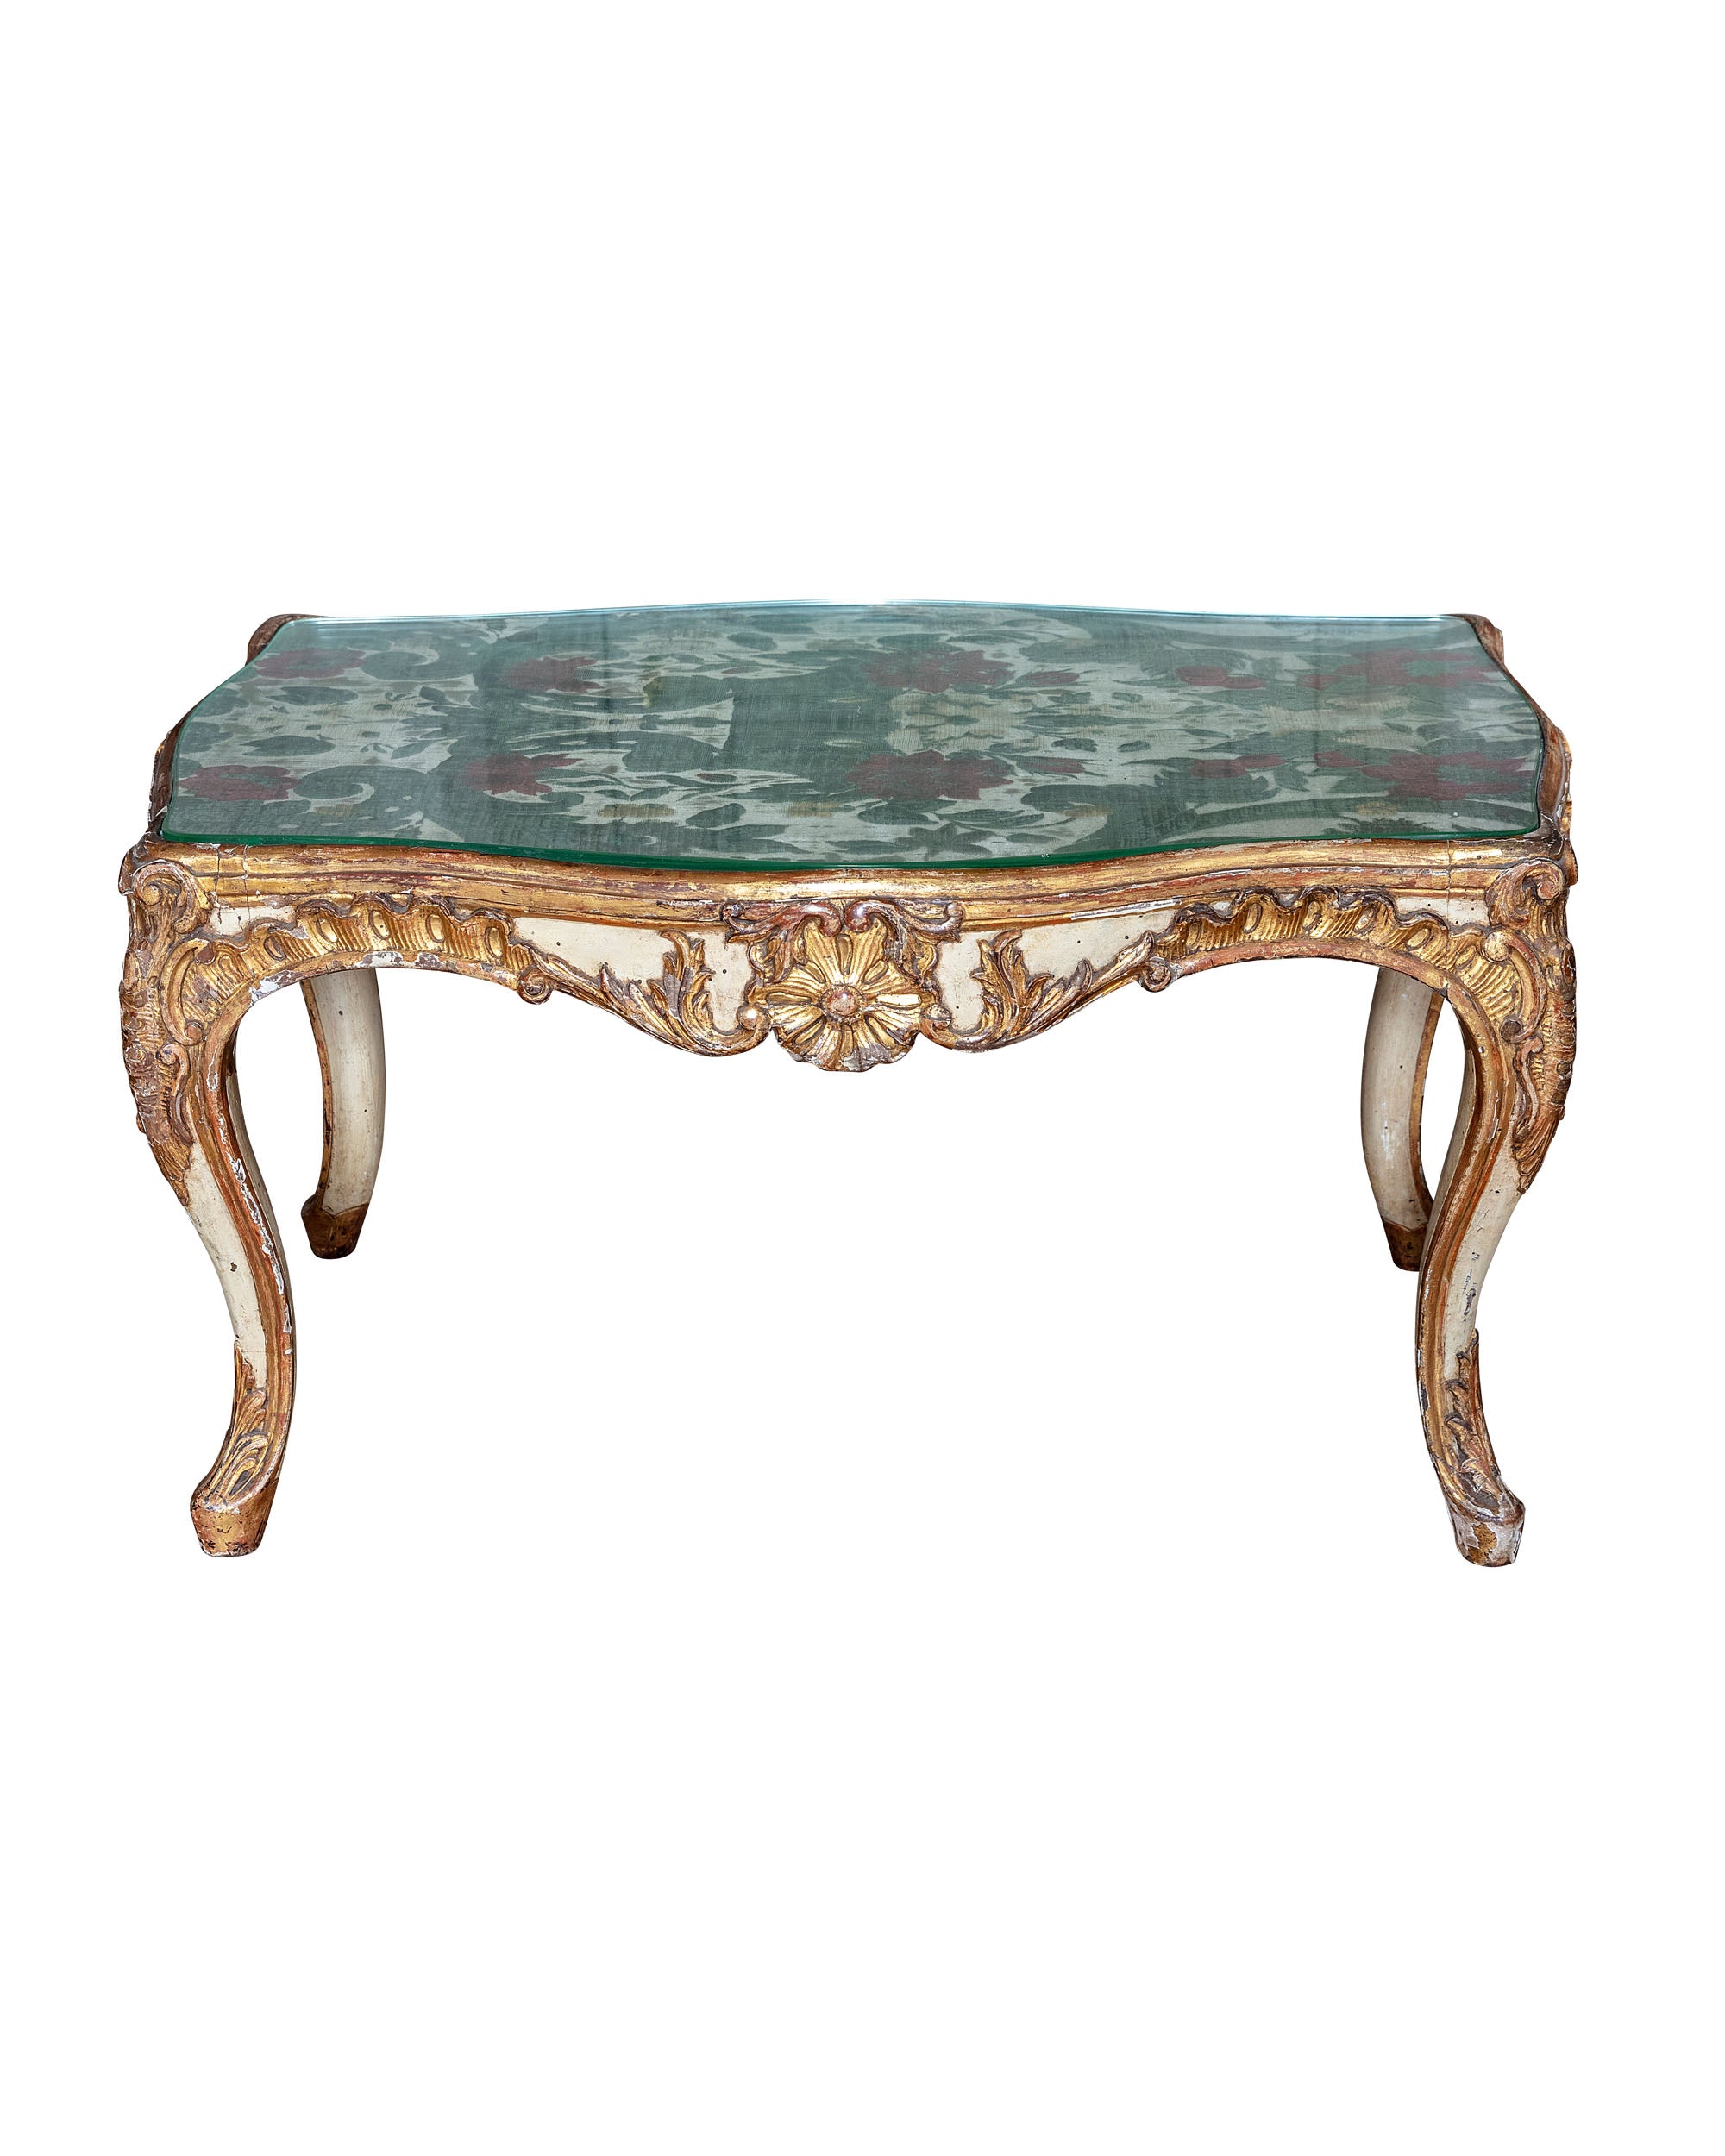 Carved wooden side table with velvet and silk damask fabric top. XVIIIth century 